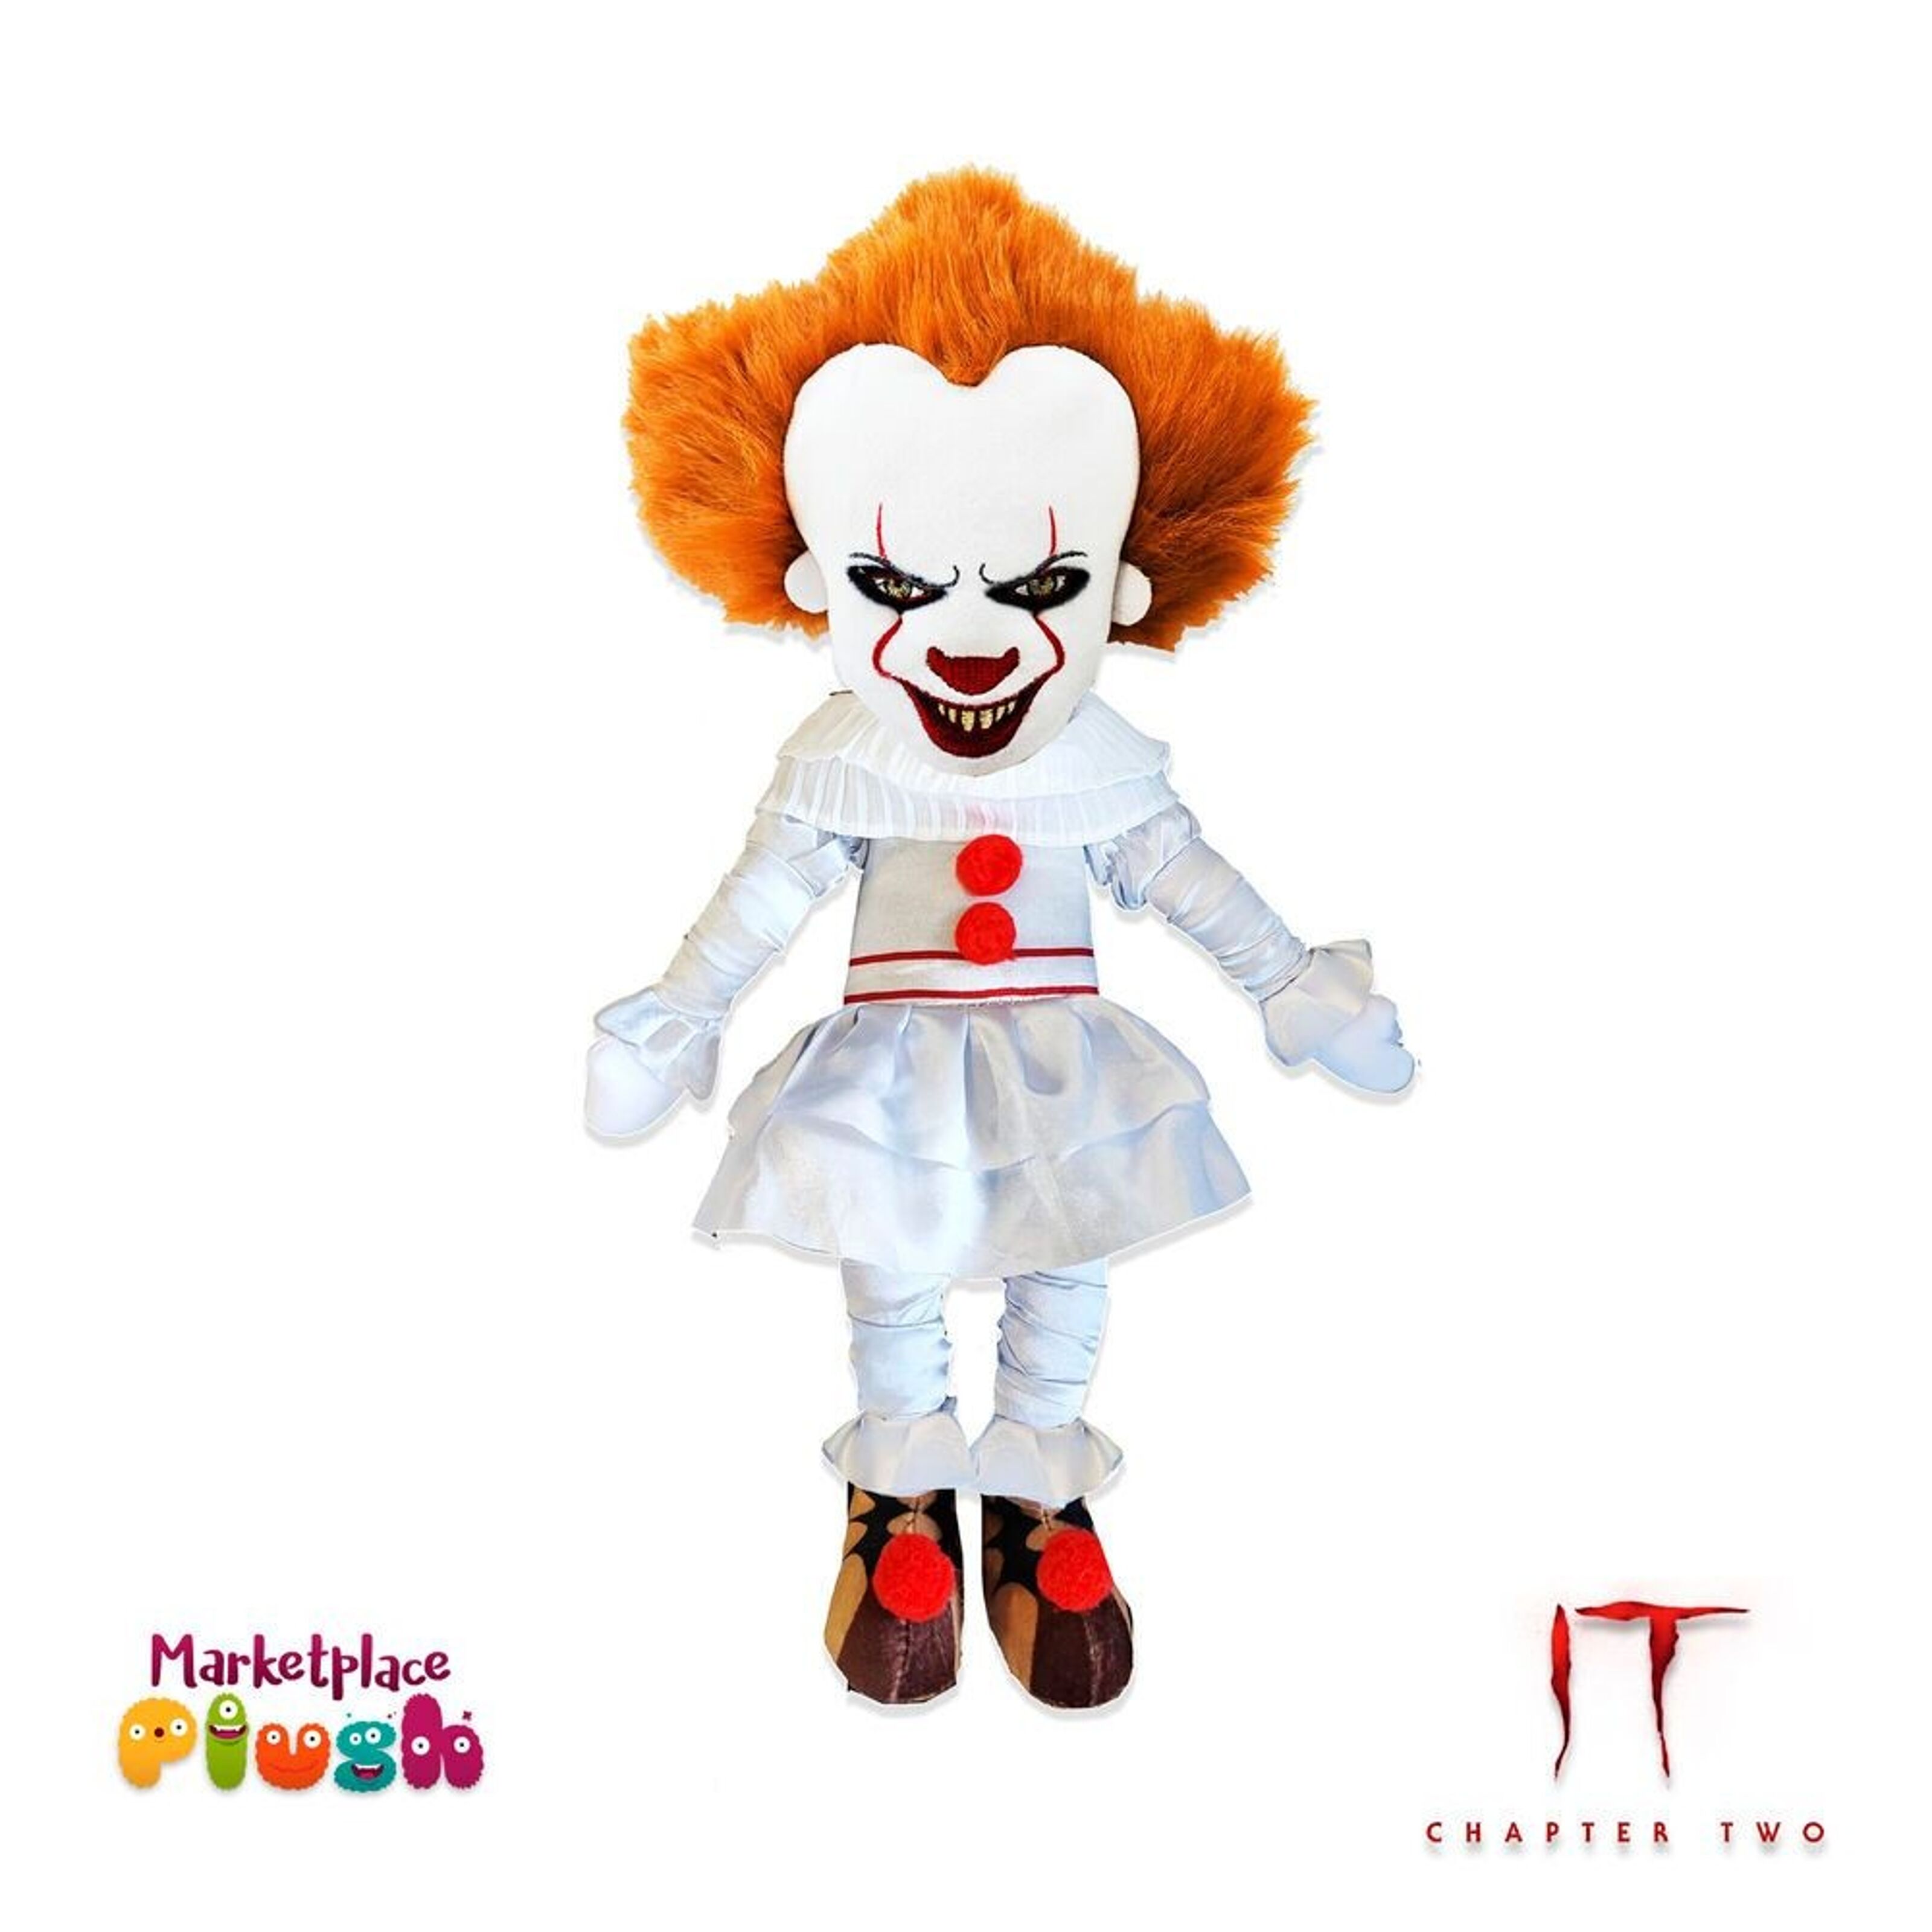 Buy Georgie Pennywise IT PVC Morale Patch Online